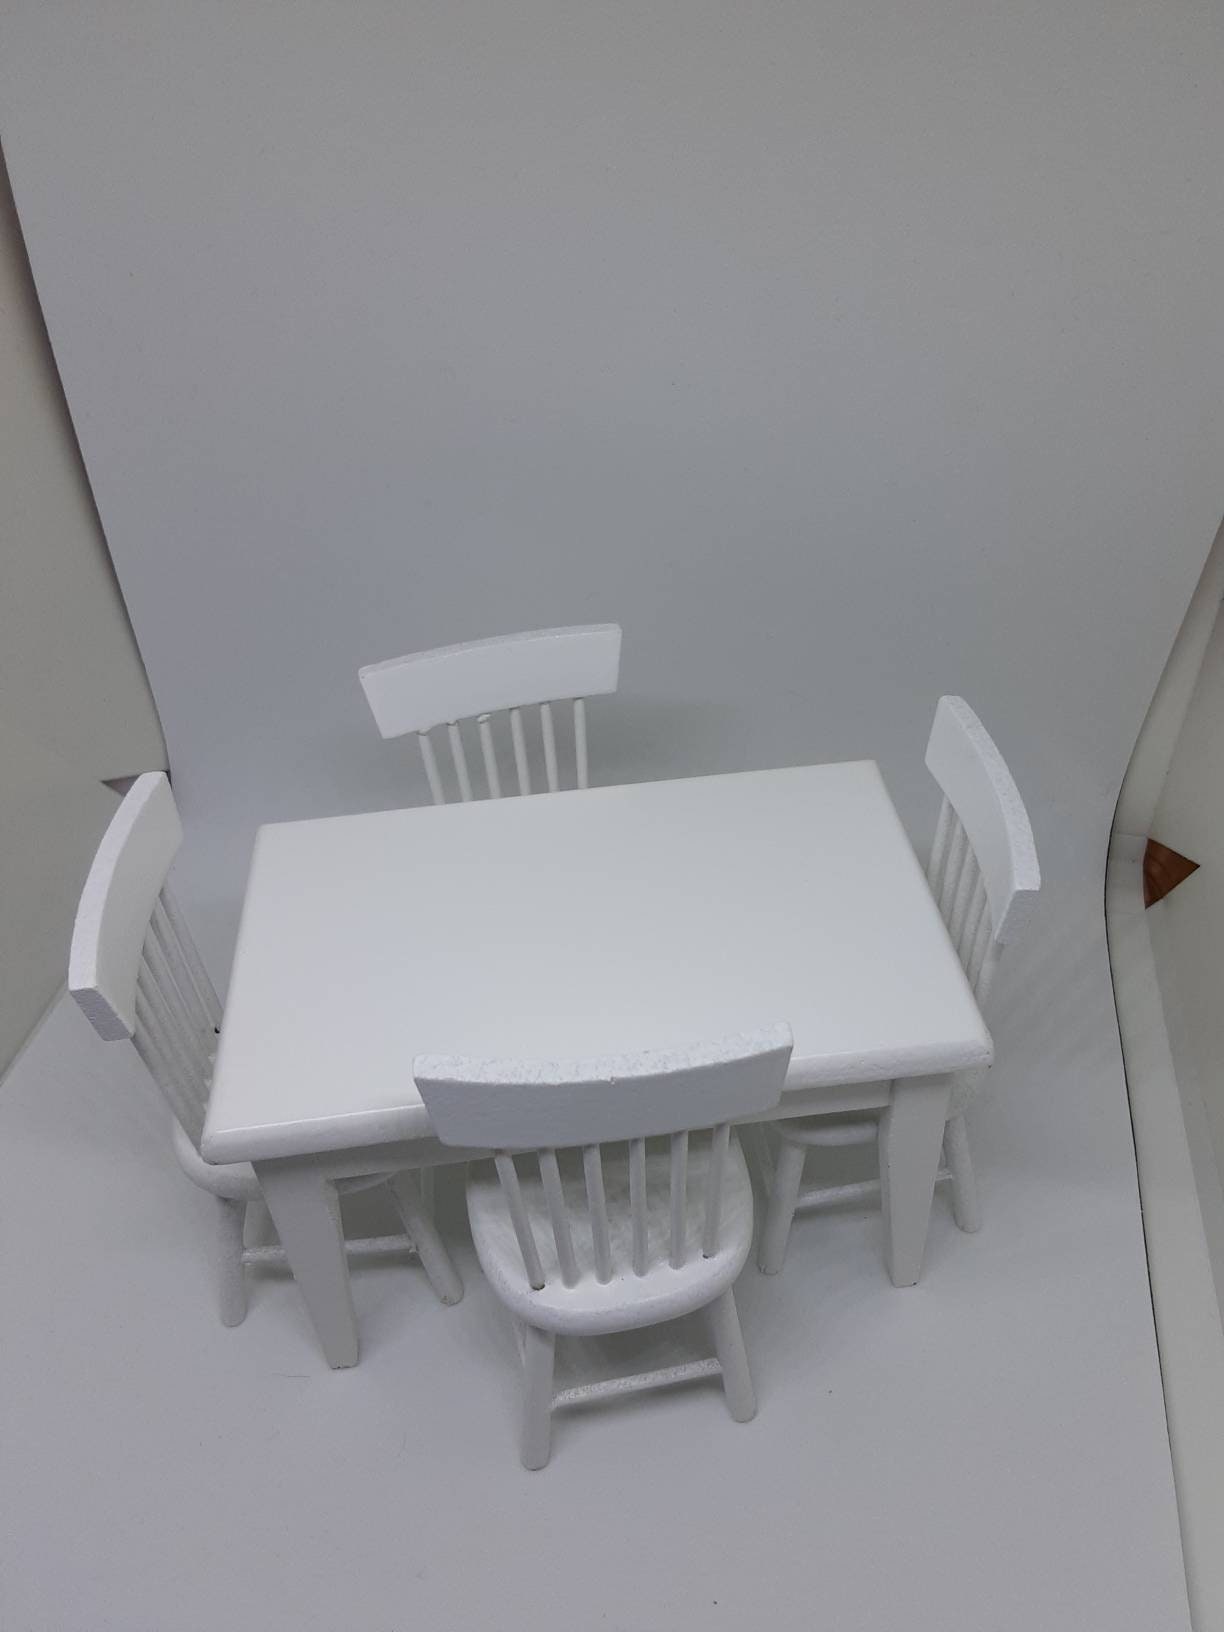 Dining Room Table with Chairs  RB0021/T6339 Dollhouse Miniature White Kitchen 